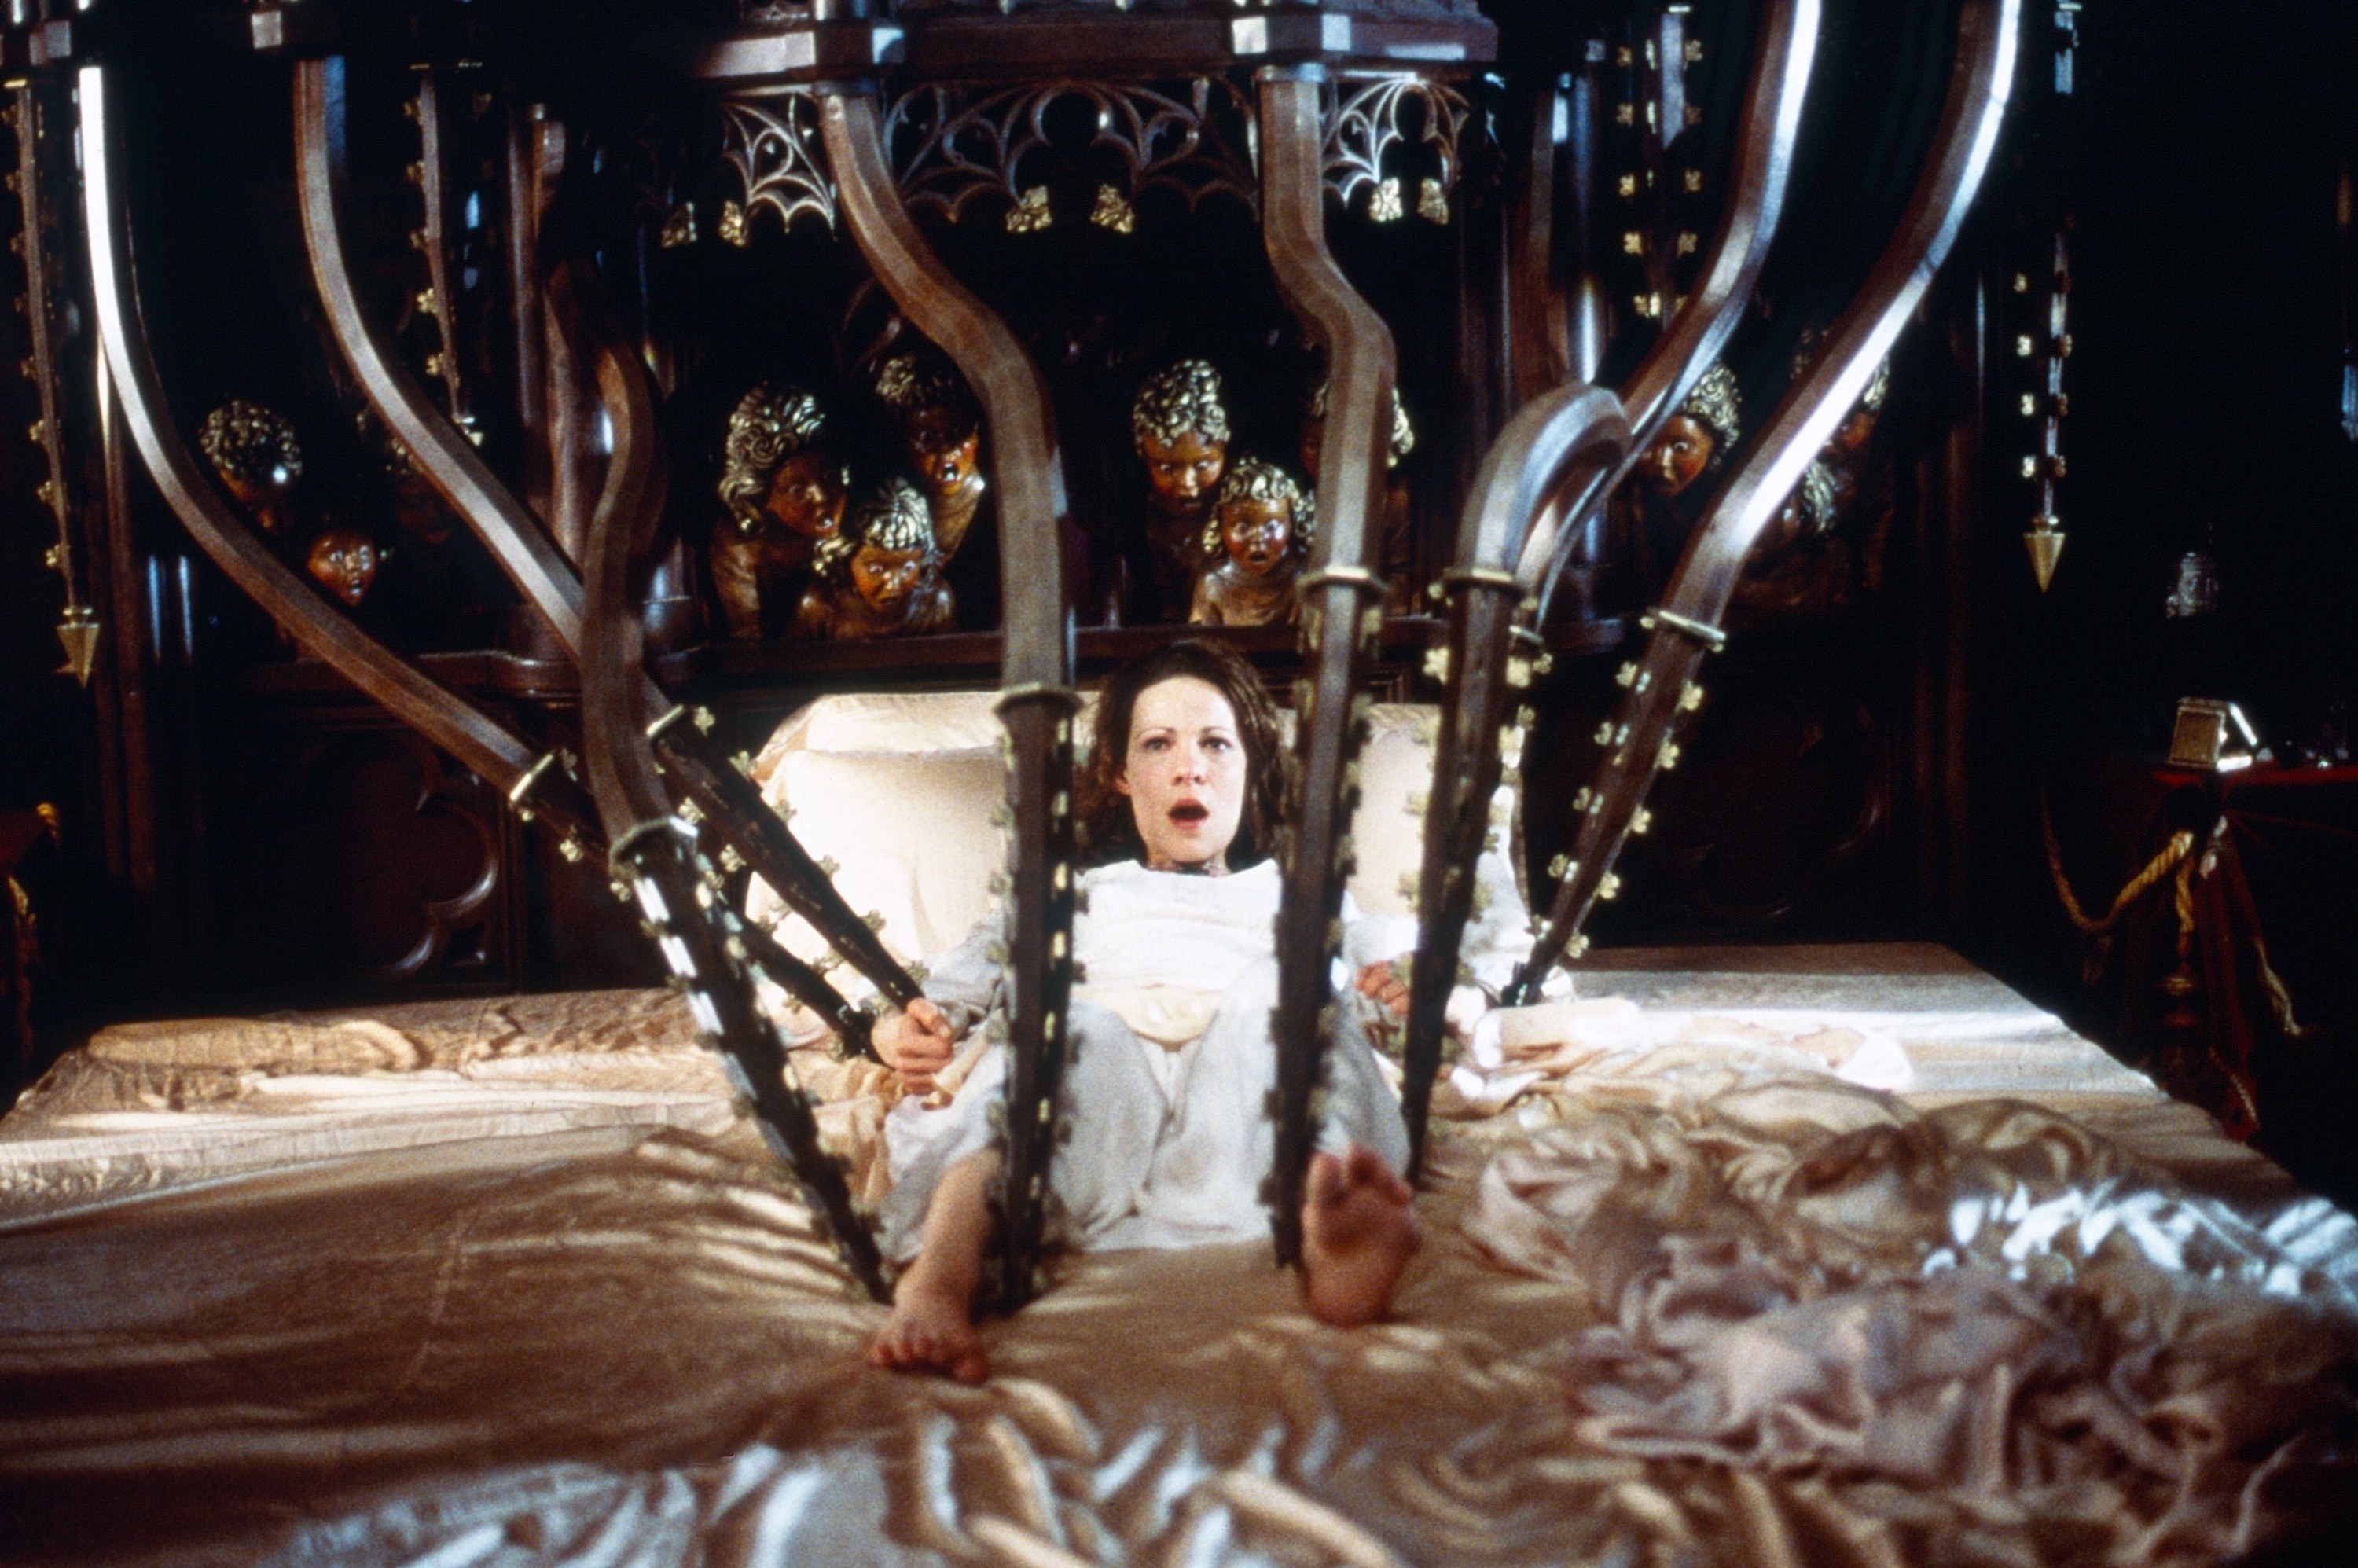 Lili Taylor in bed in restraints